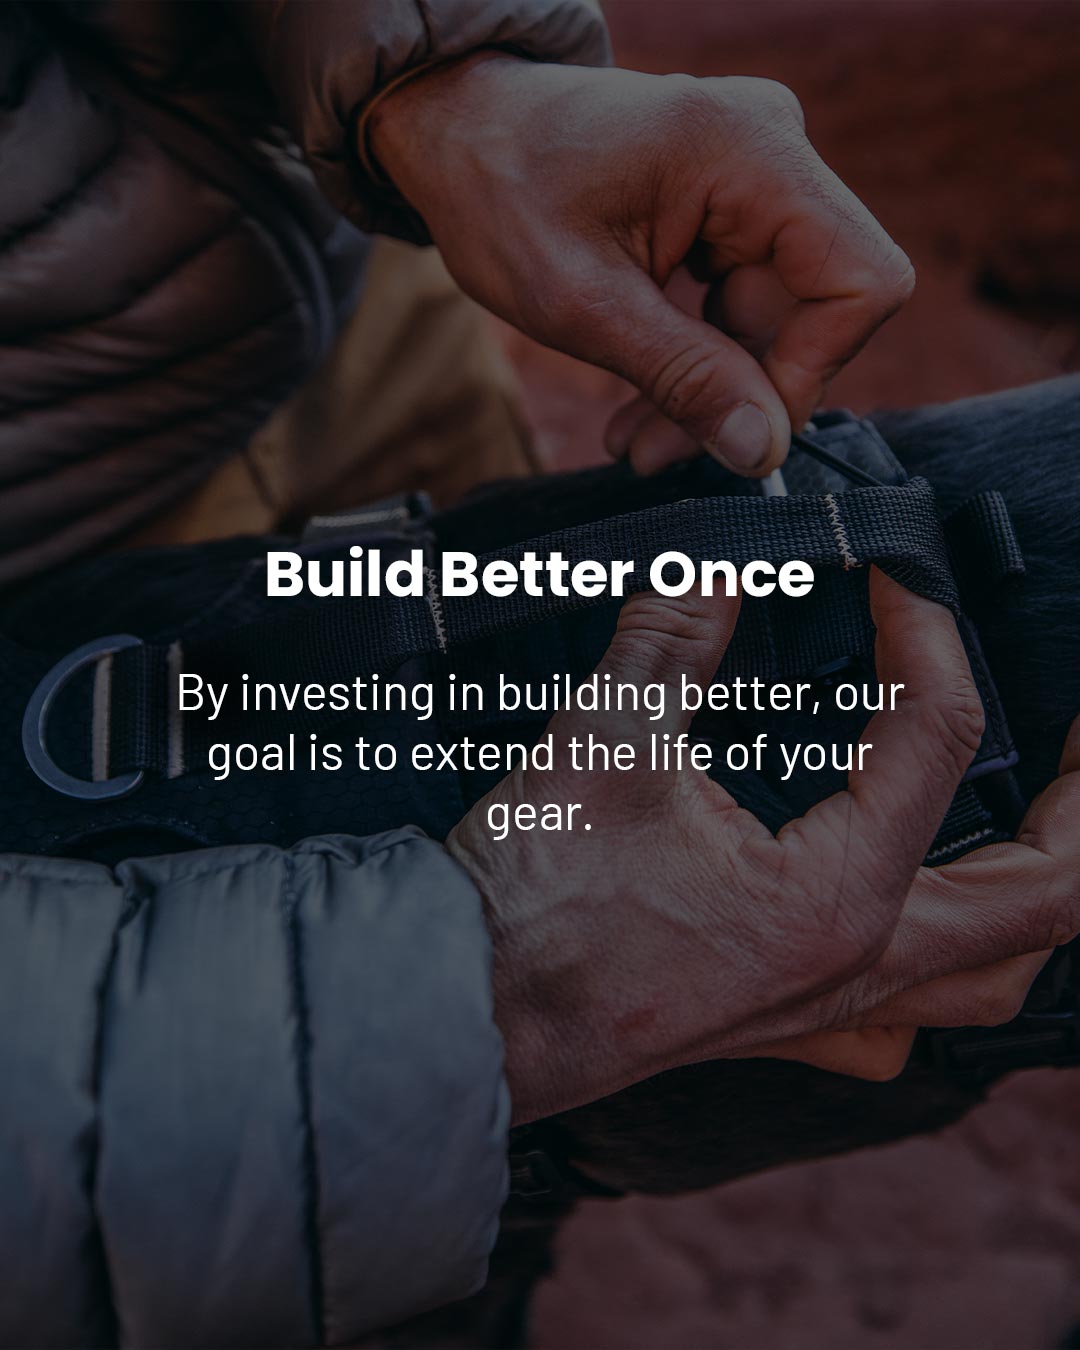 Build better once - Saker principle with hands on canyon harness in the back